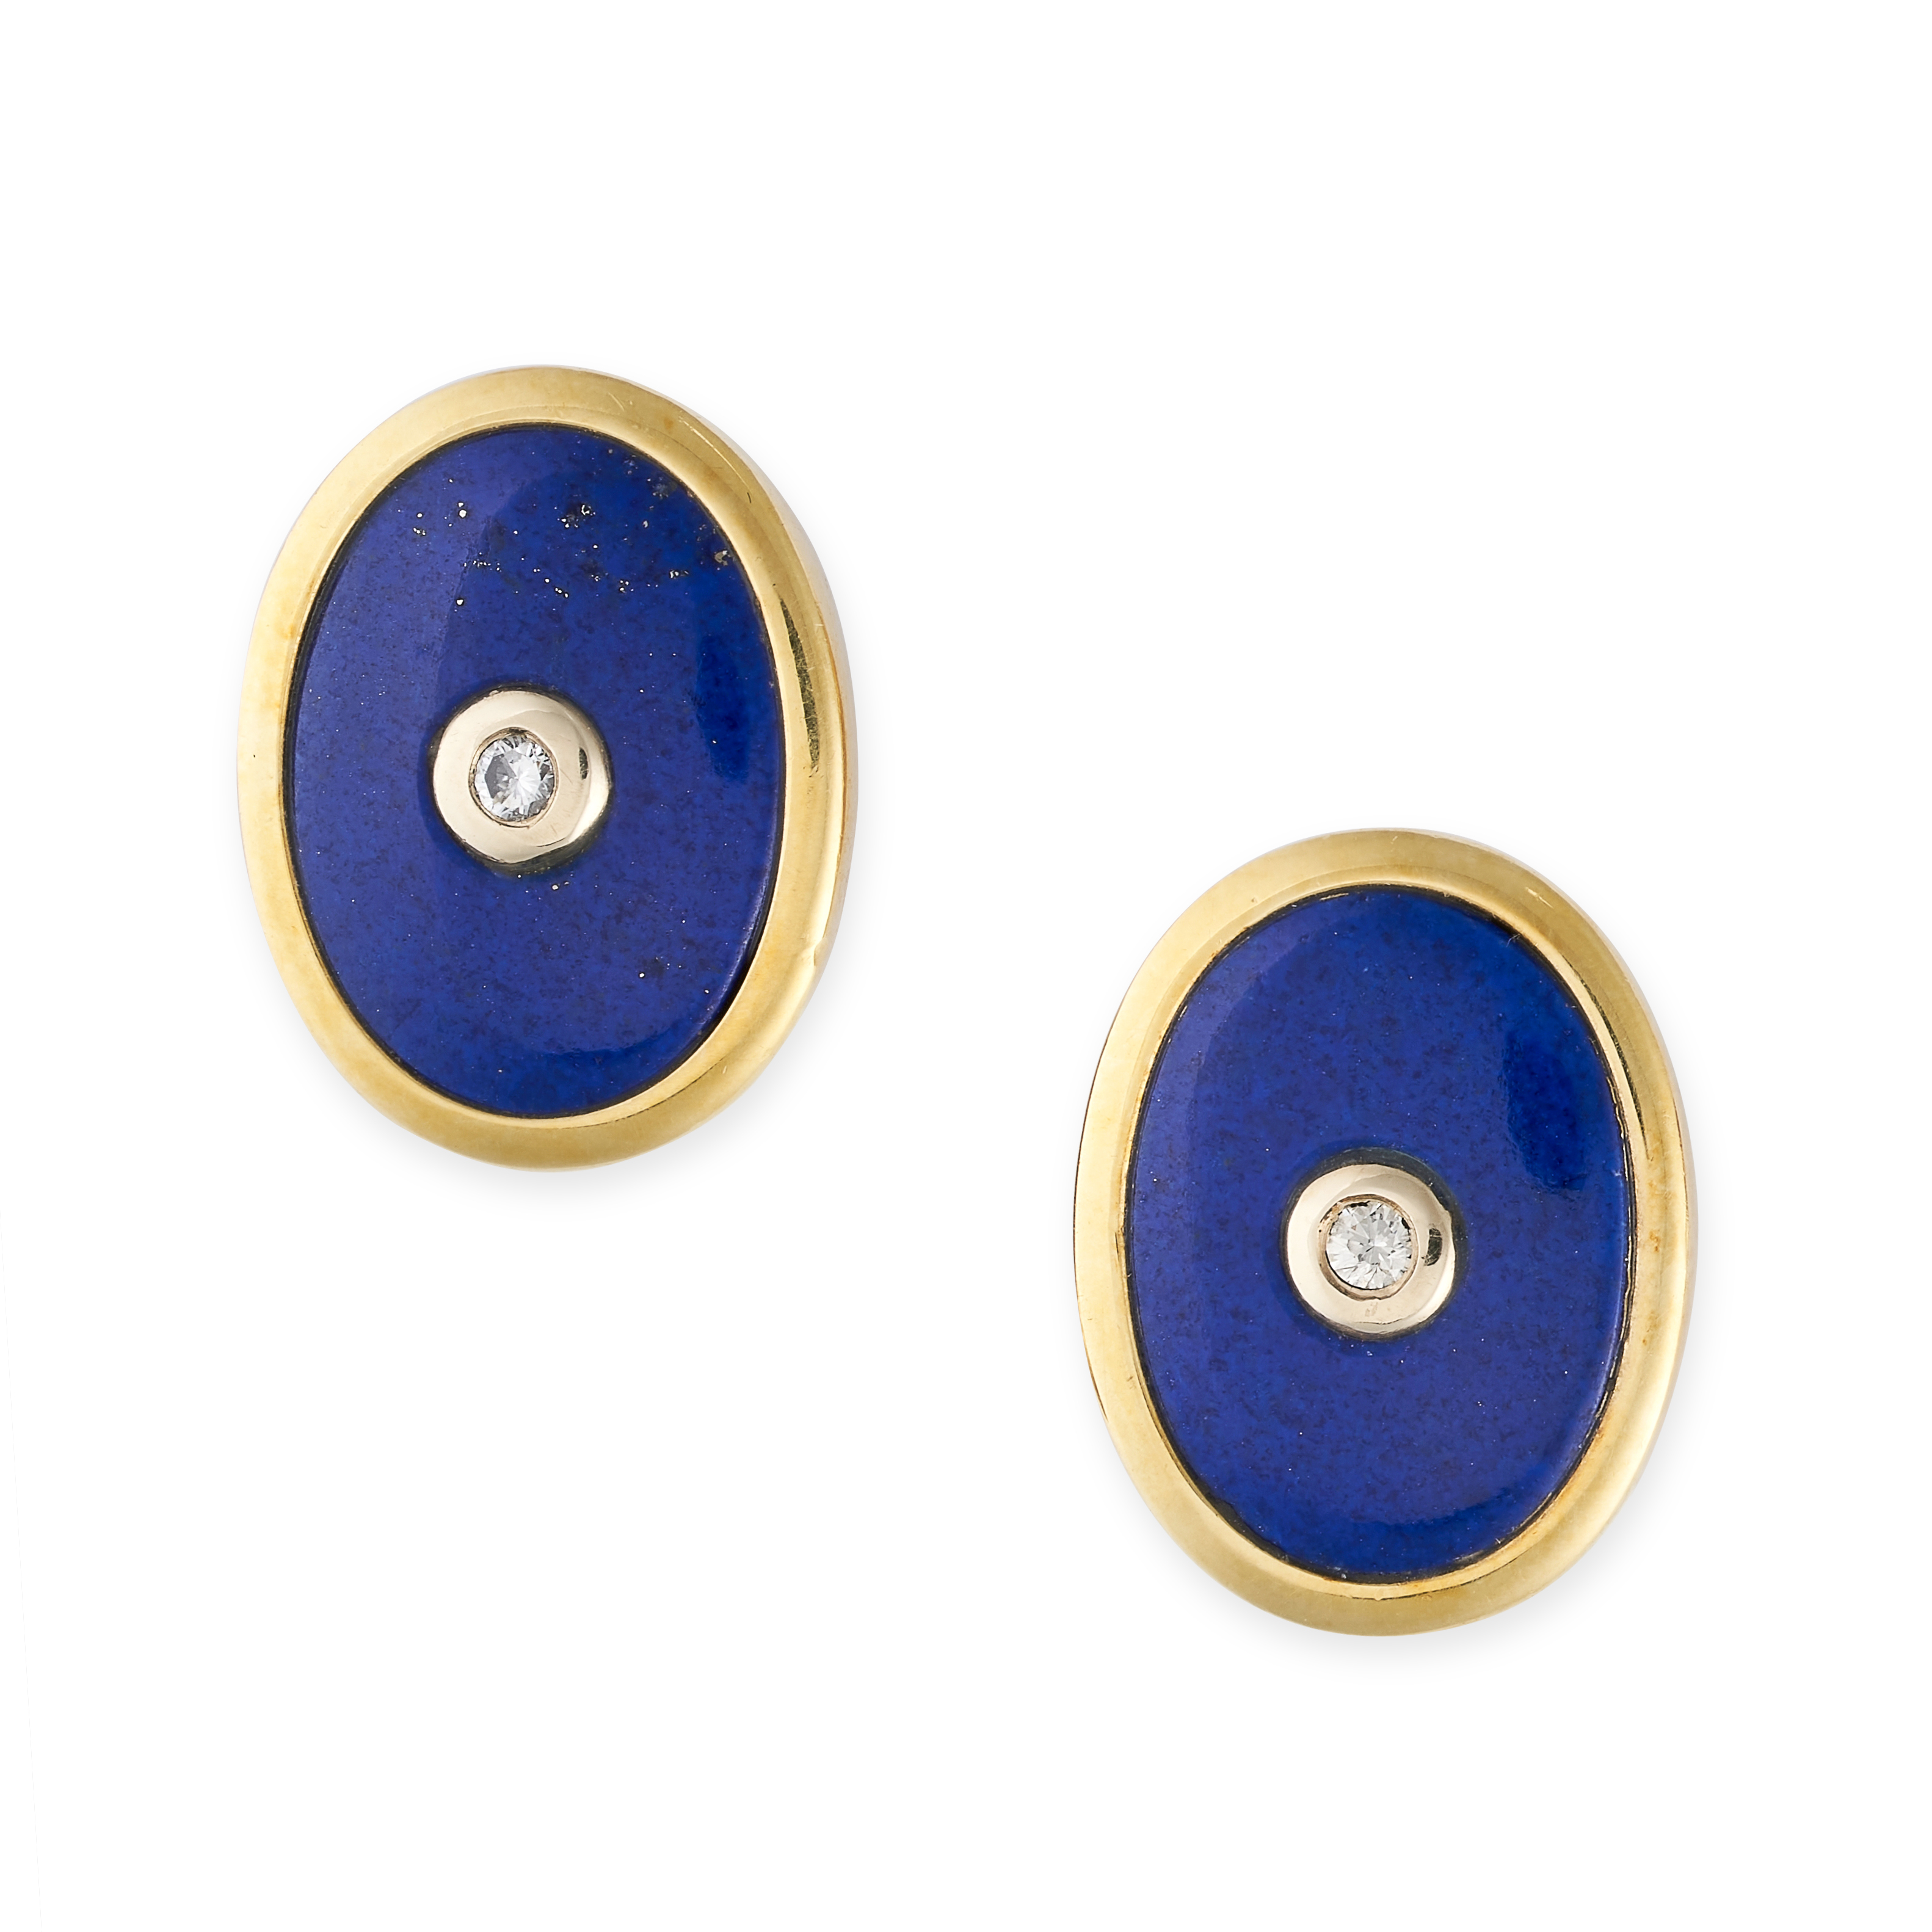 A PAIR OF LAPIS LAZULI AND DIAMOND CLIP EARRINGS  Clip fittings  Polished lapis lazuli  Brilliant-